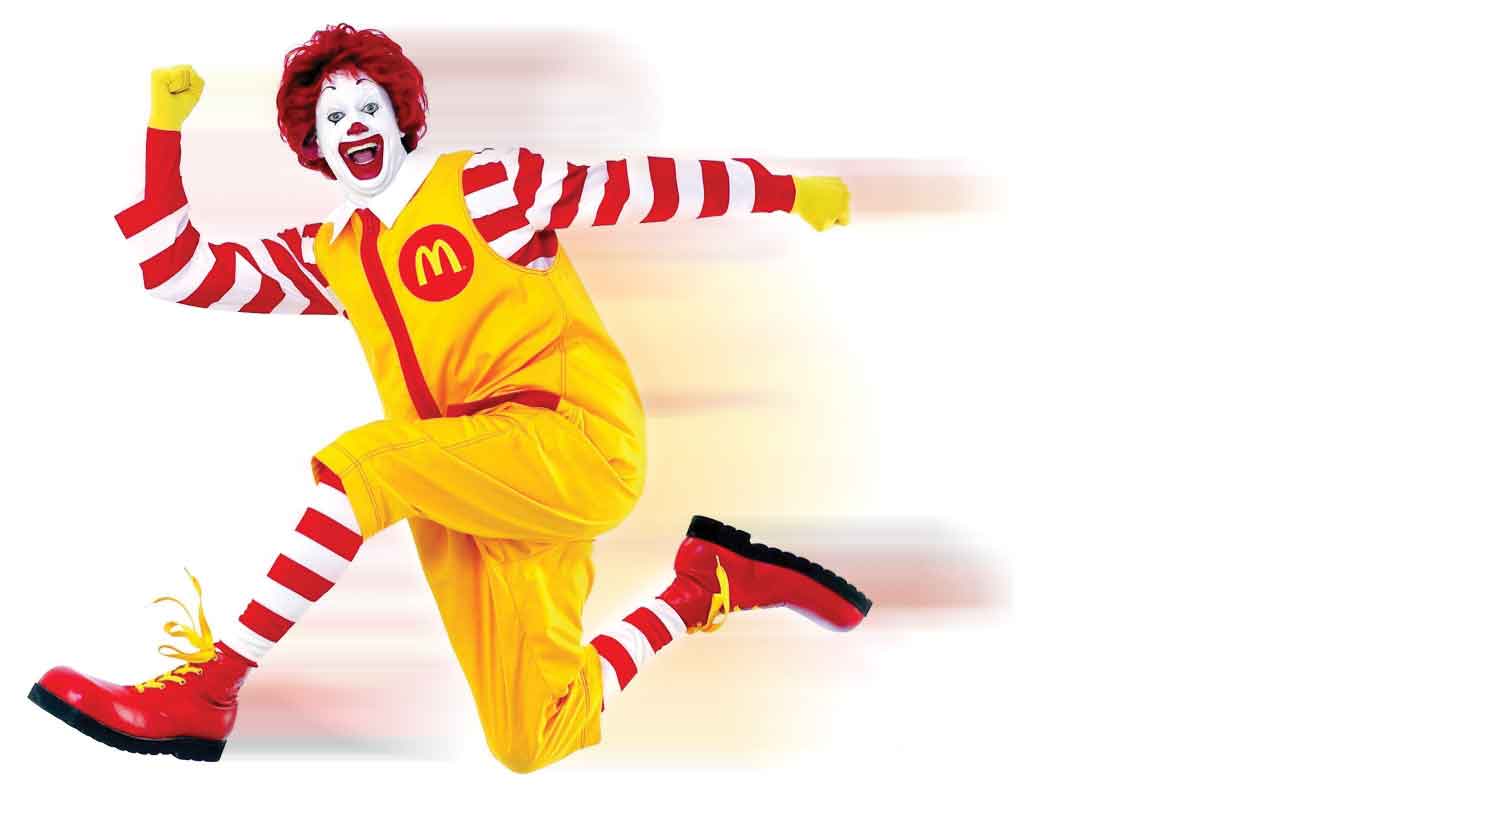 Ronald McDonald sprinting so fast that he is blurry.